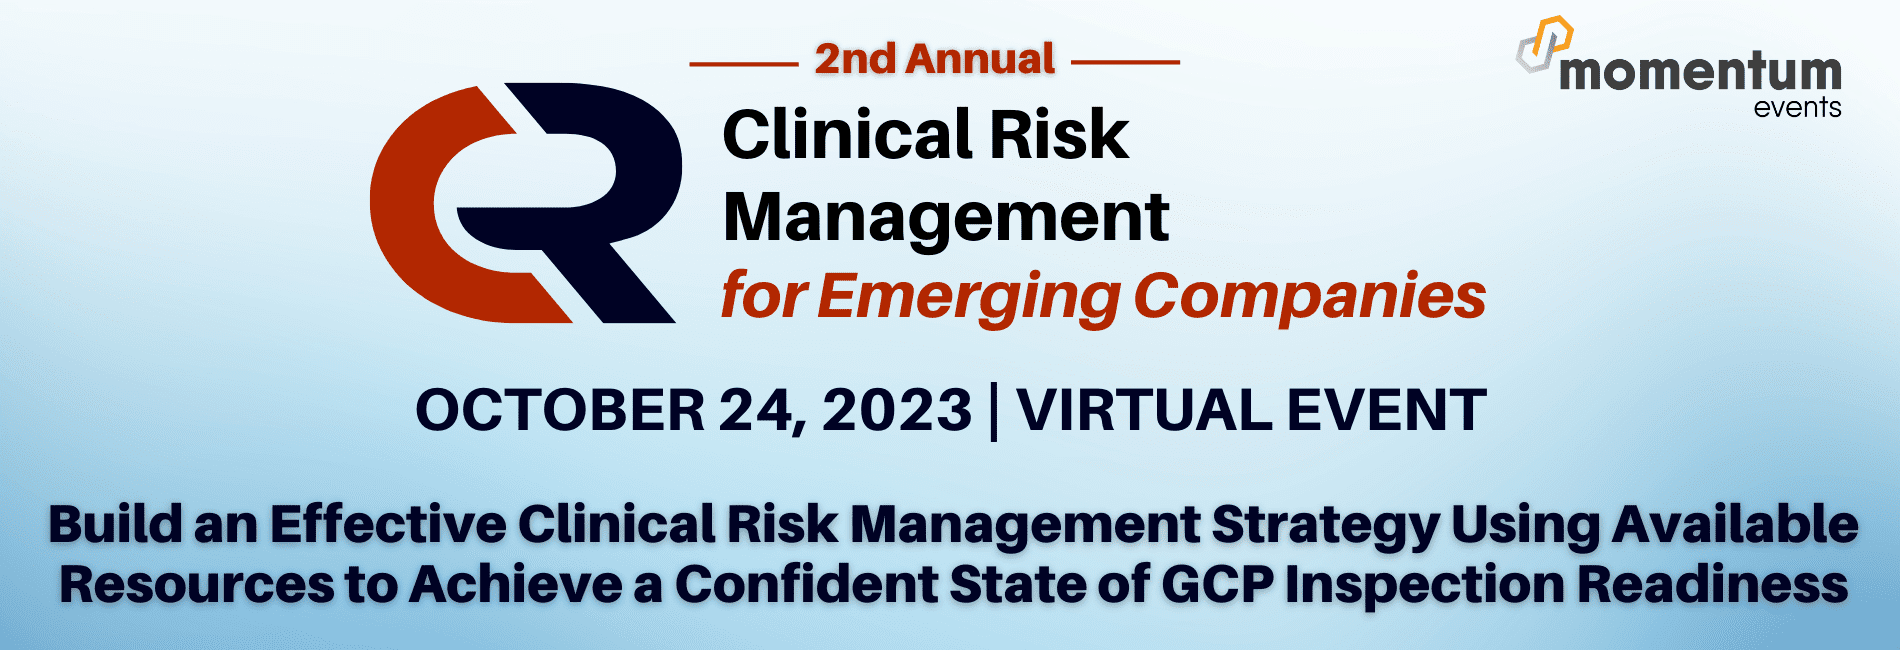 2nd Annual Clinical Risk Management For Emerging Companies, October 24, 2023, Virtual Event, Build an Effective Clinical Risk Management Strategy Using Available Resources to Achieve a Confident State of GCP Inspection Readiness